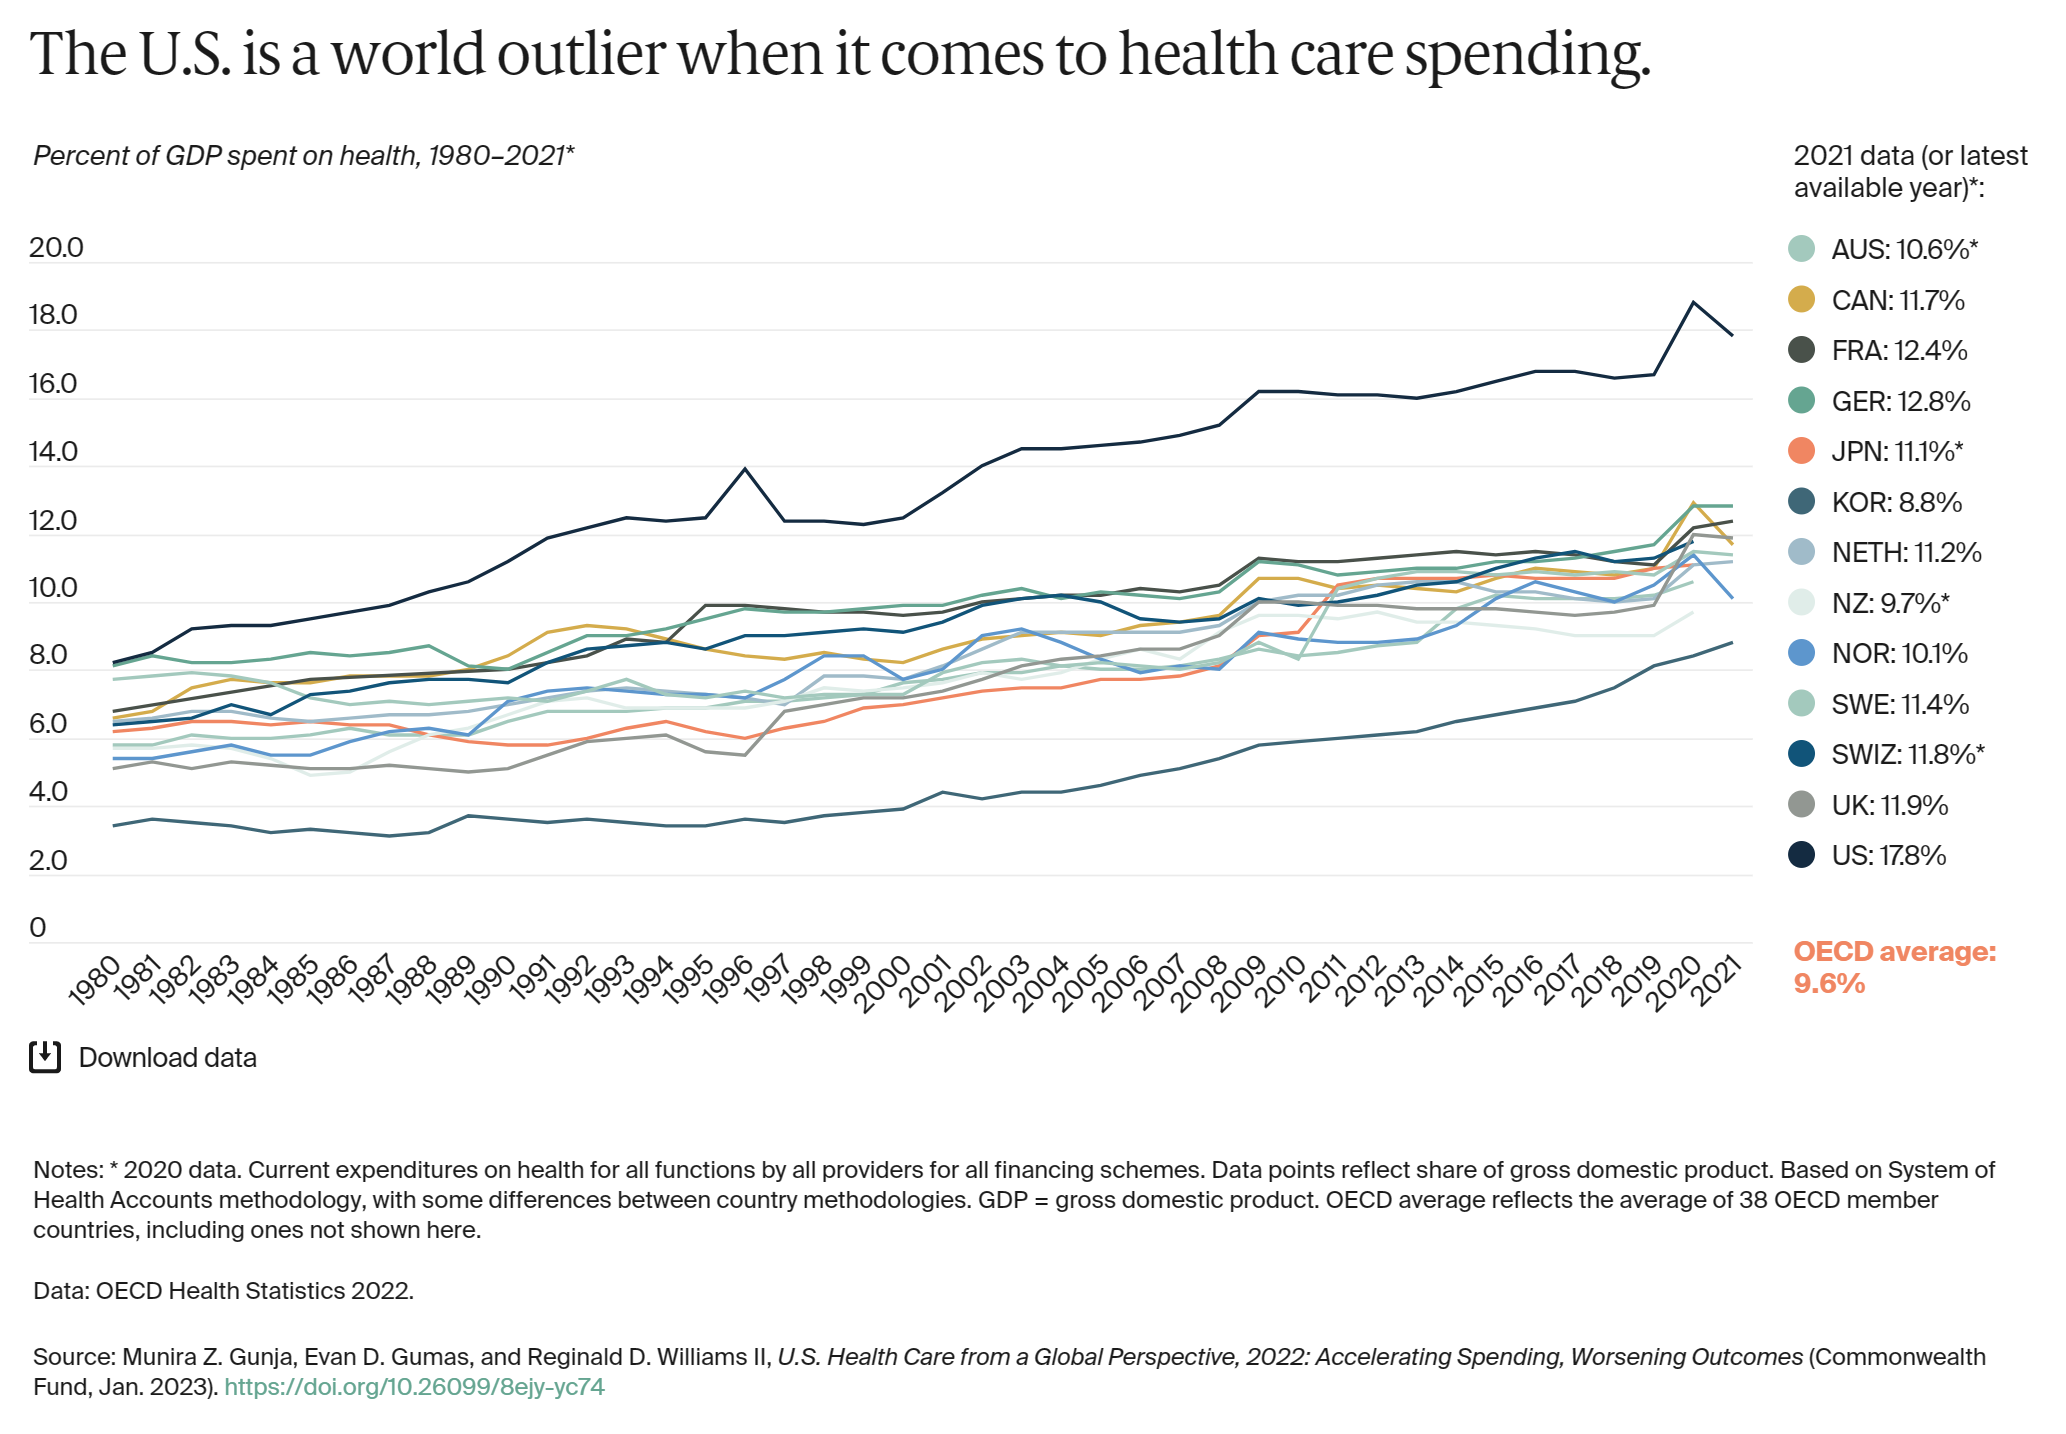 Percent of GDP spent on health in OECD nations, 1980–2021. The U.S. is a world outlier when it comes to health care spending. Graphic: The Commonwealth Fund